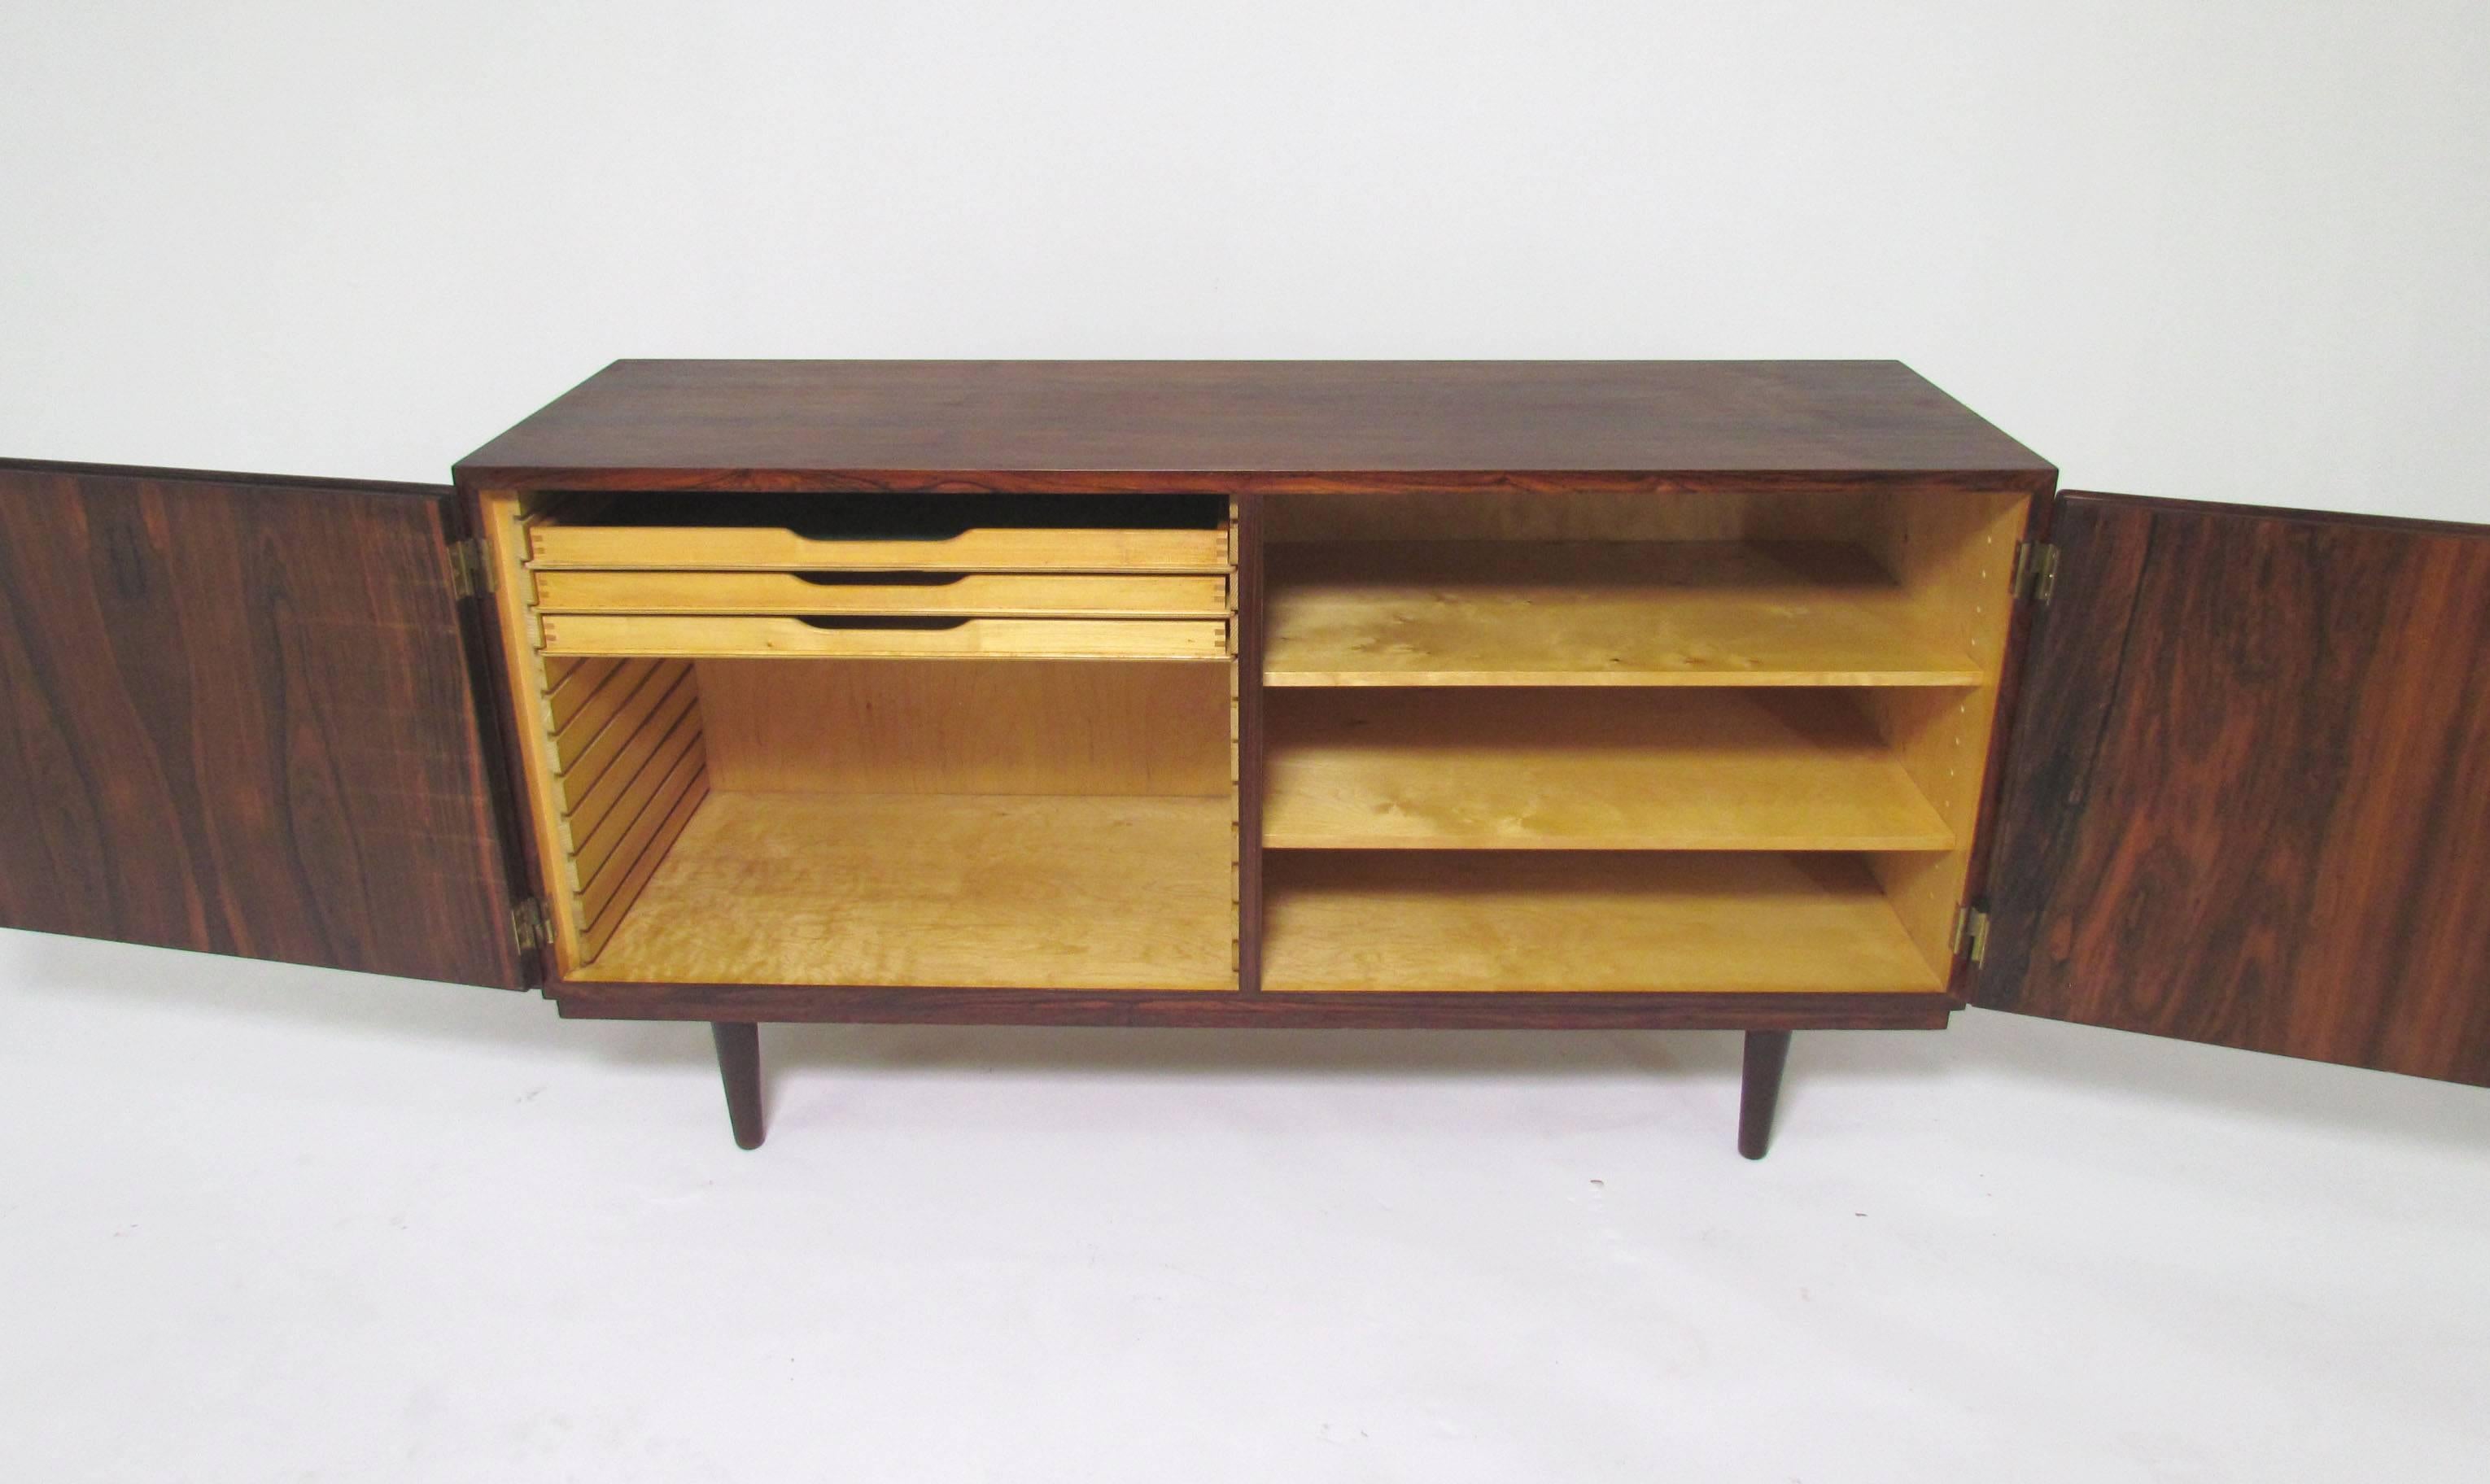 Mid-20th Century Danish Rosewood Sideboard by Carlo Jensen for Poul Hundevad, circa 1950s